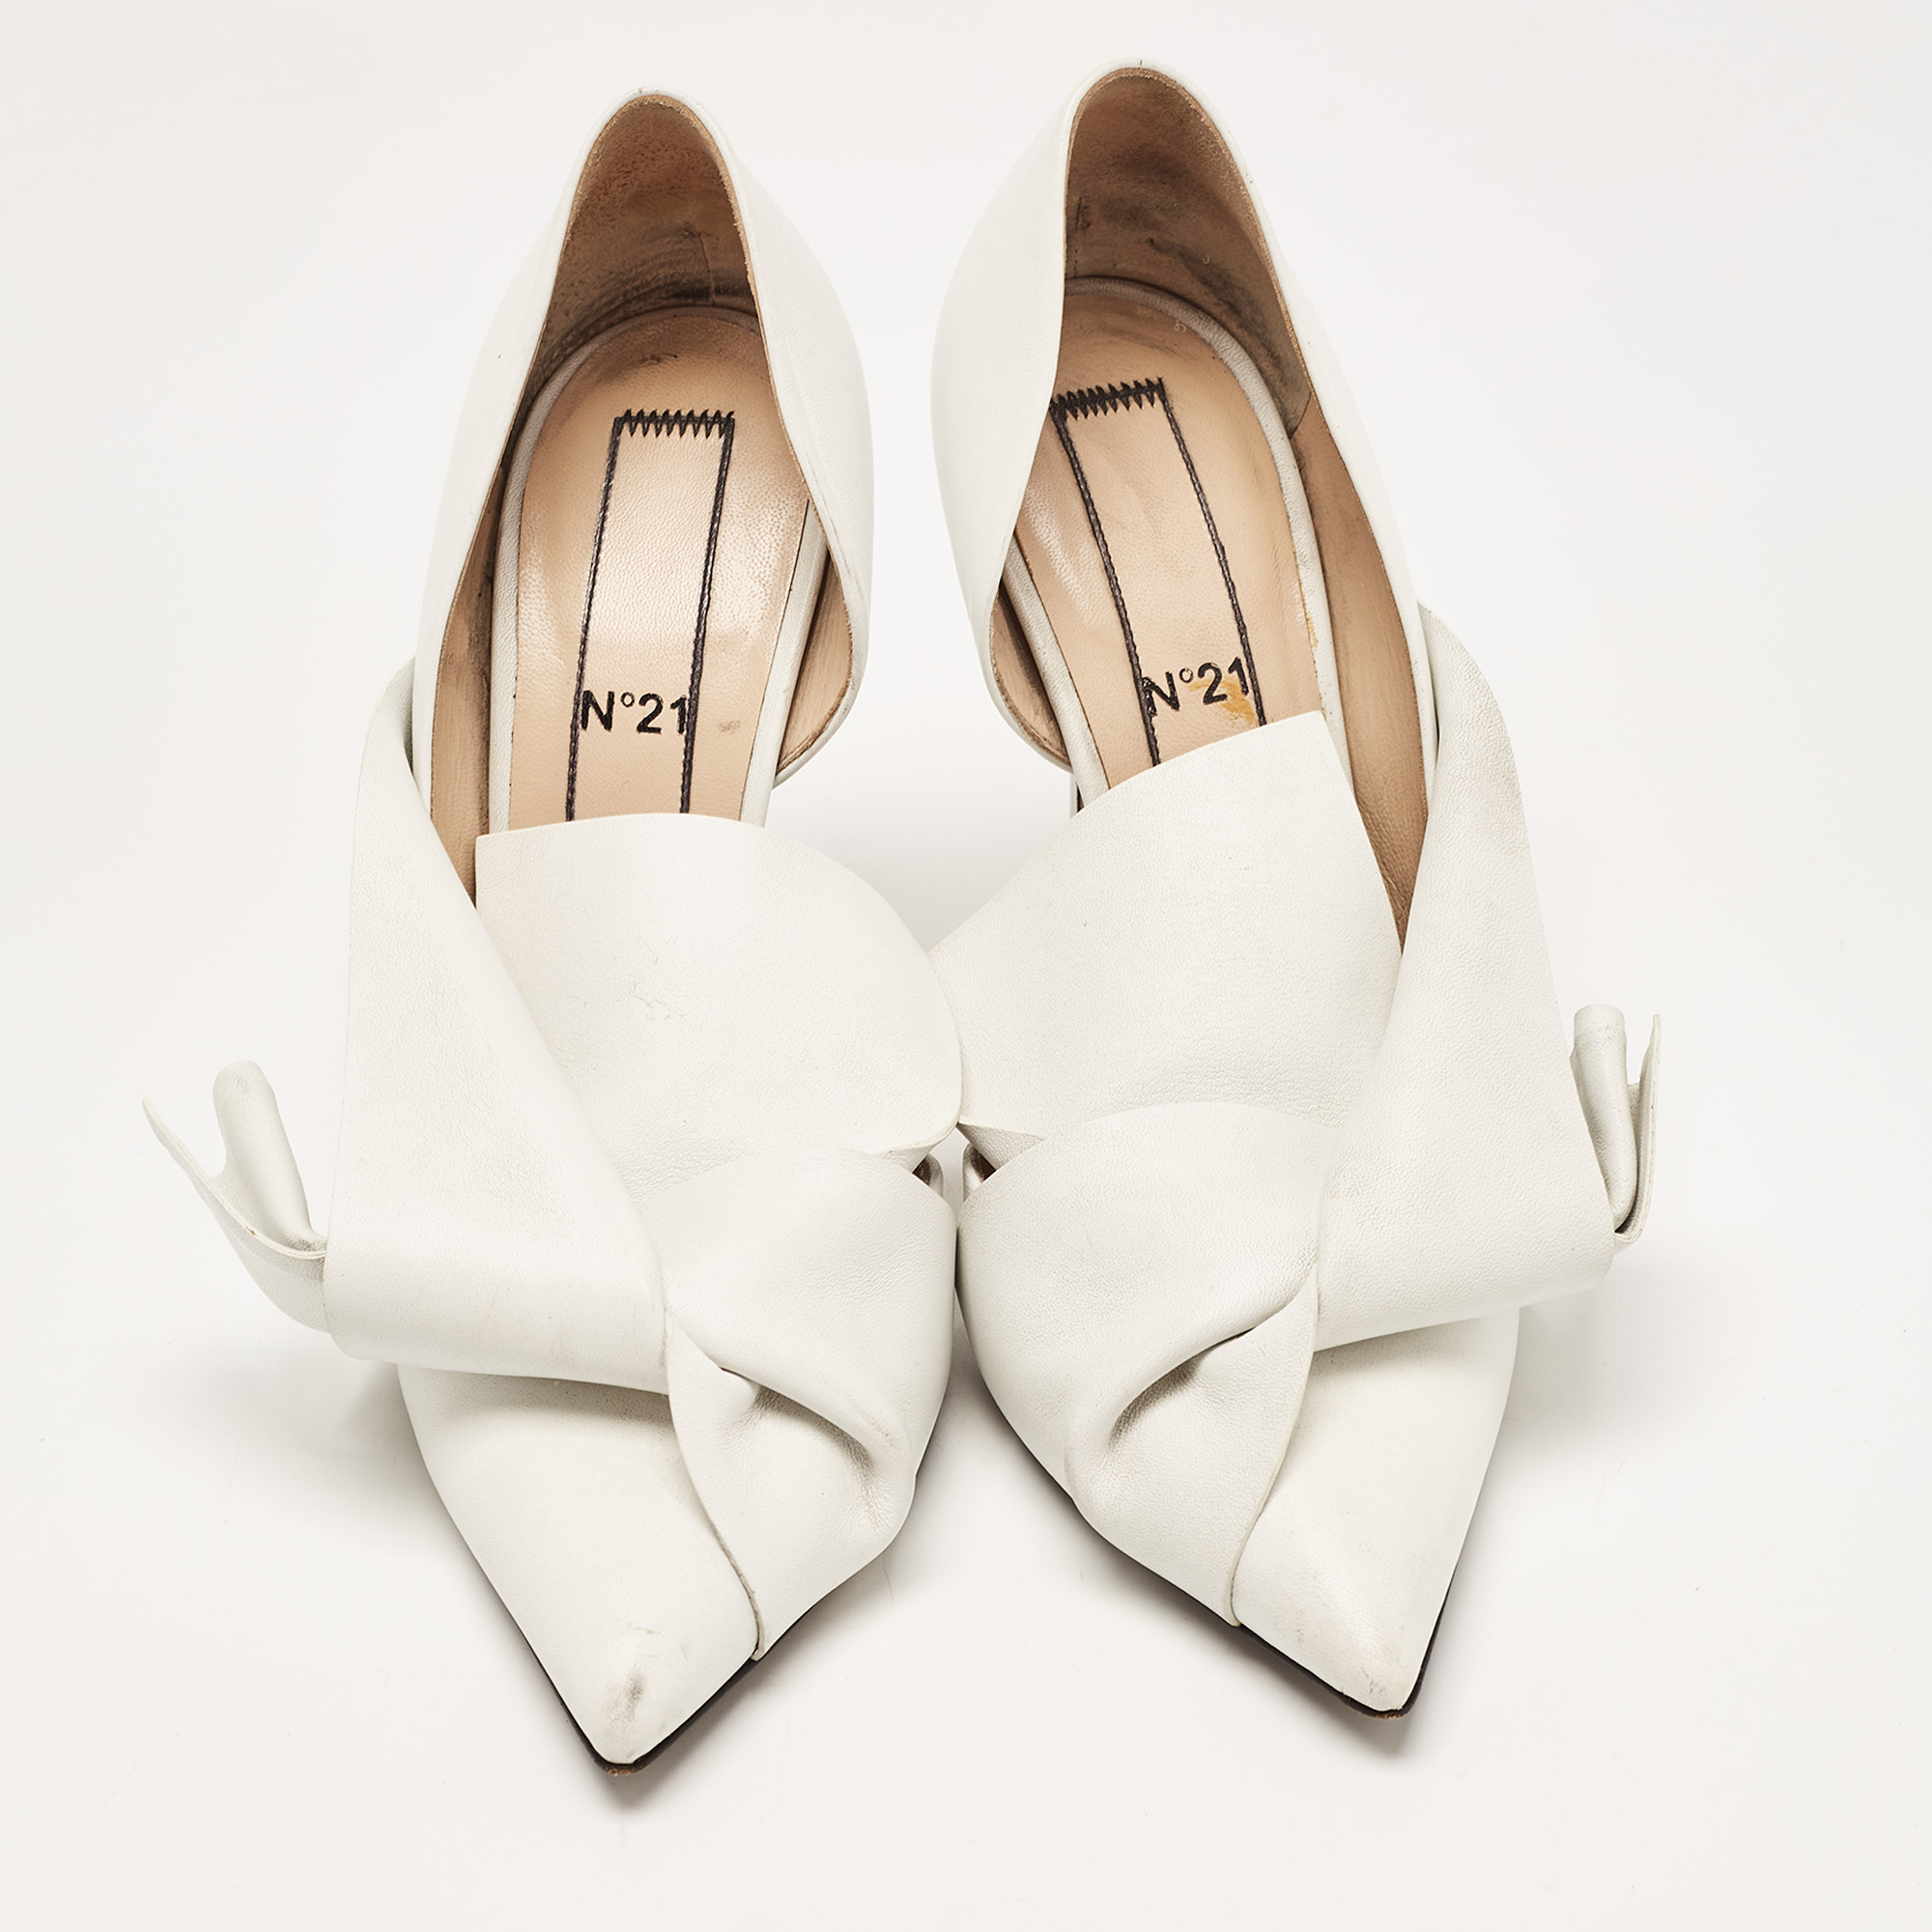 Nº21 White Leather Knot Pointed Toe Pumps Size 39